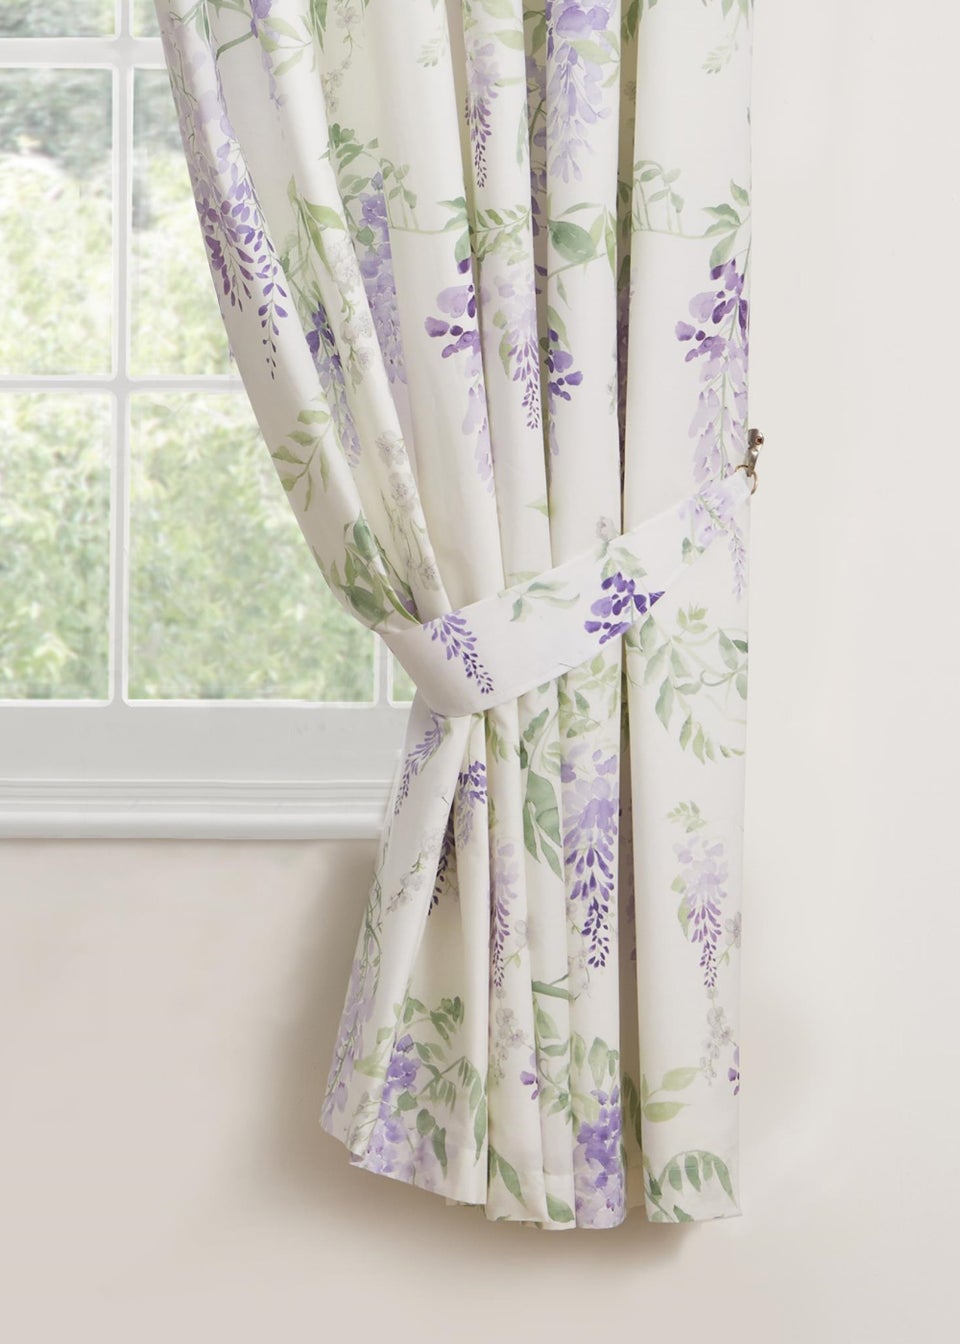 Dreams & Drapes Wisteria Pencil Pleat Curtains With Tie-Backs